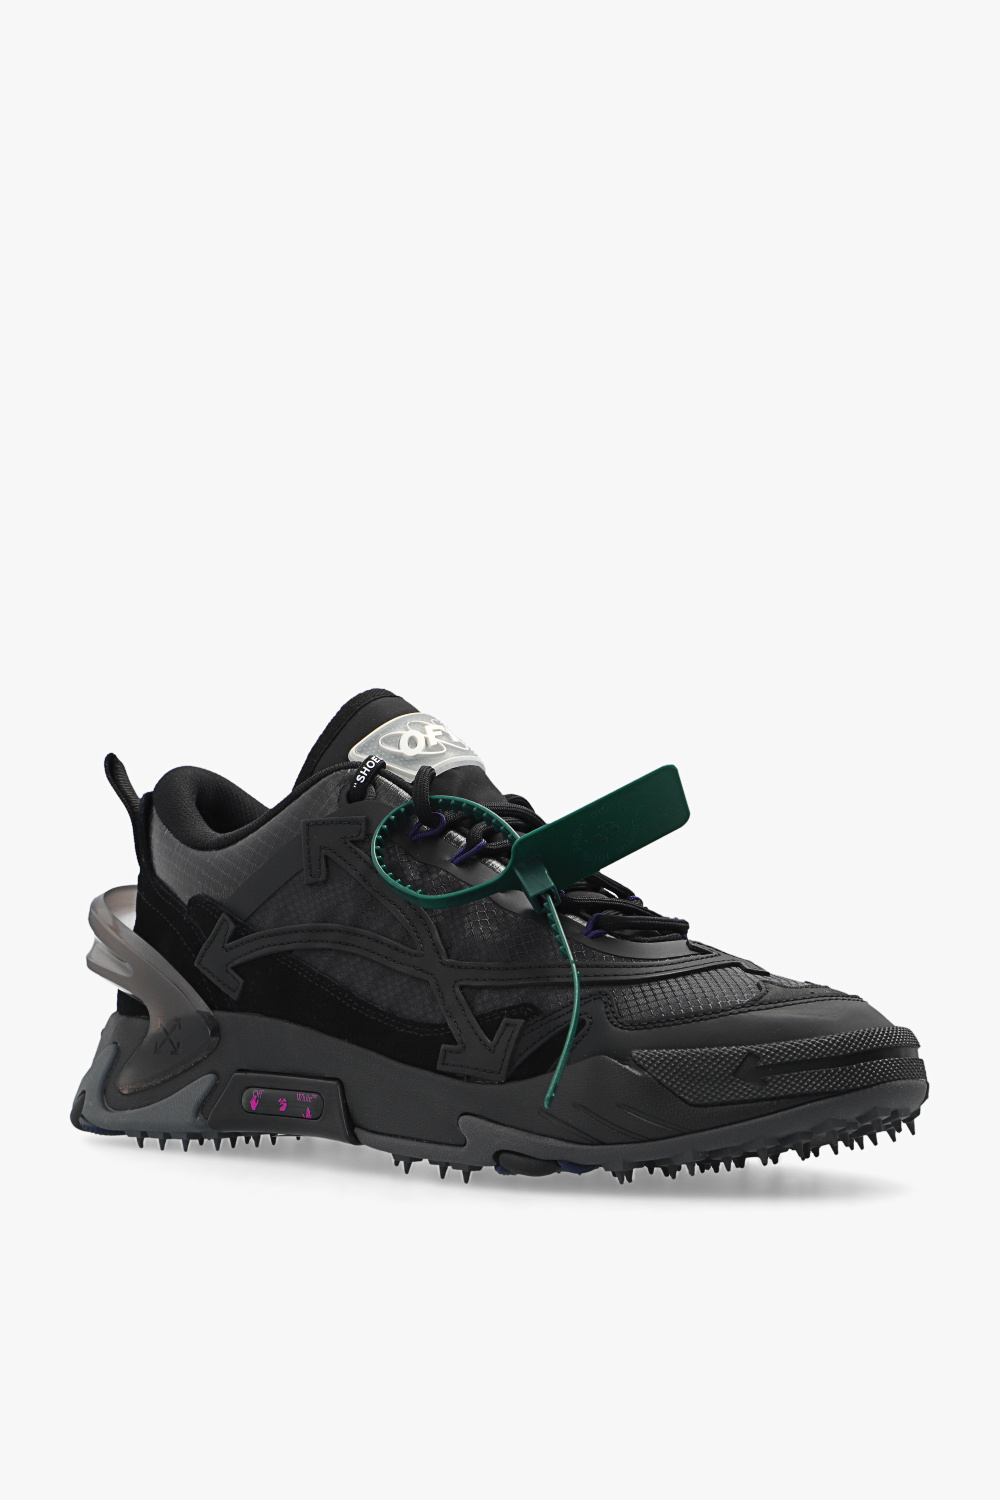 Off-White ‘Odsy 1000’ sneakers